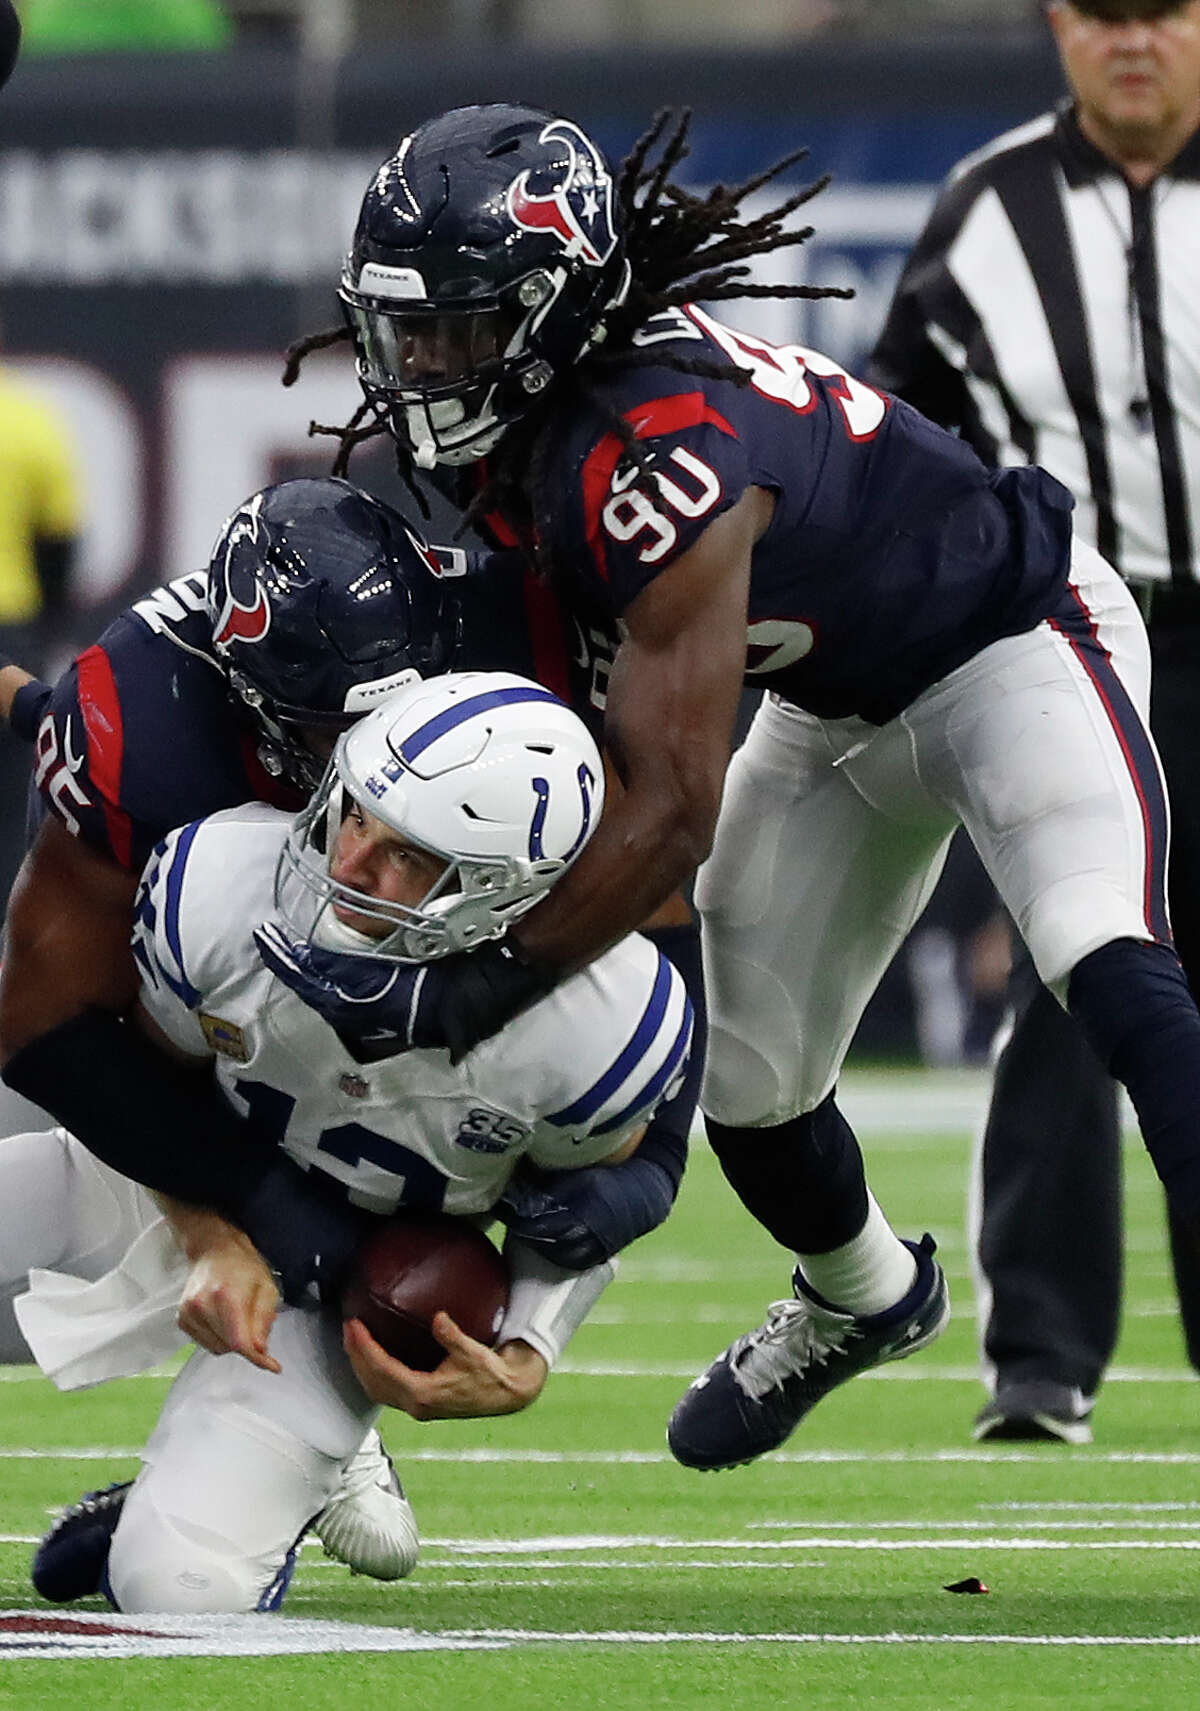 Indianapolis Colts quarterback Andrew Luck (12) is sacked by Houston Texans defensive end Christian Covington (95) and Houston Texans outside linebacker Jadeveon Clowney (90) during the fourth quarter of an NFL football game at NRG Stadium, Sunday, Dec. 9, 2018, in Houston.